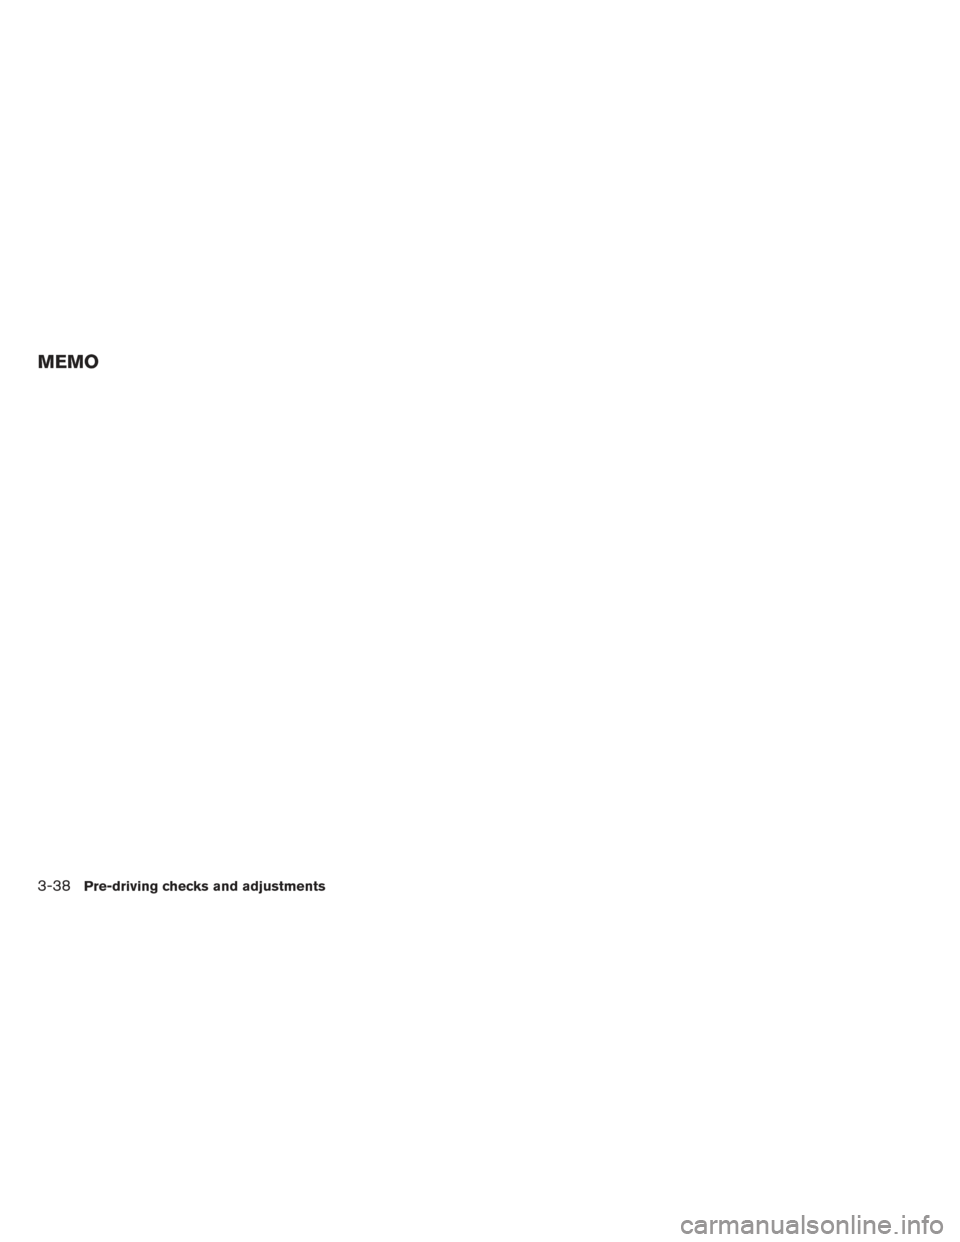 NISSAN ALTIMA 2014 L33 / 5.G Owners Manual MEMO
3-38Pre-driving checks and adjustments 